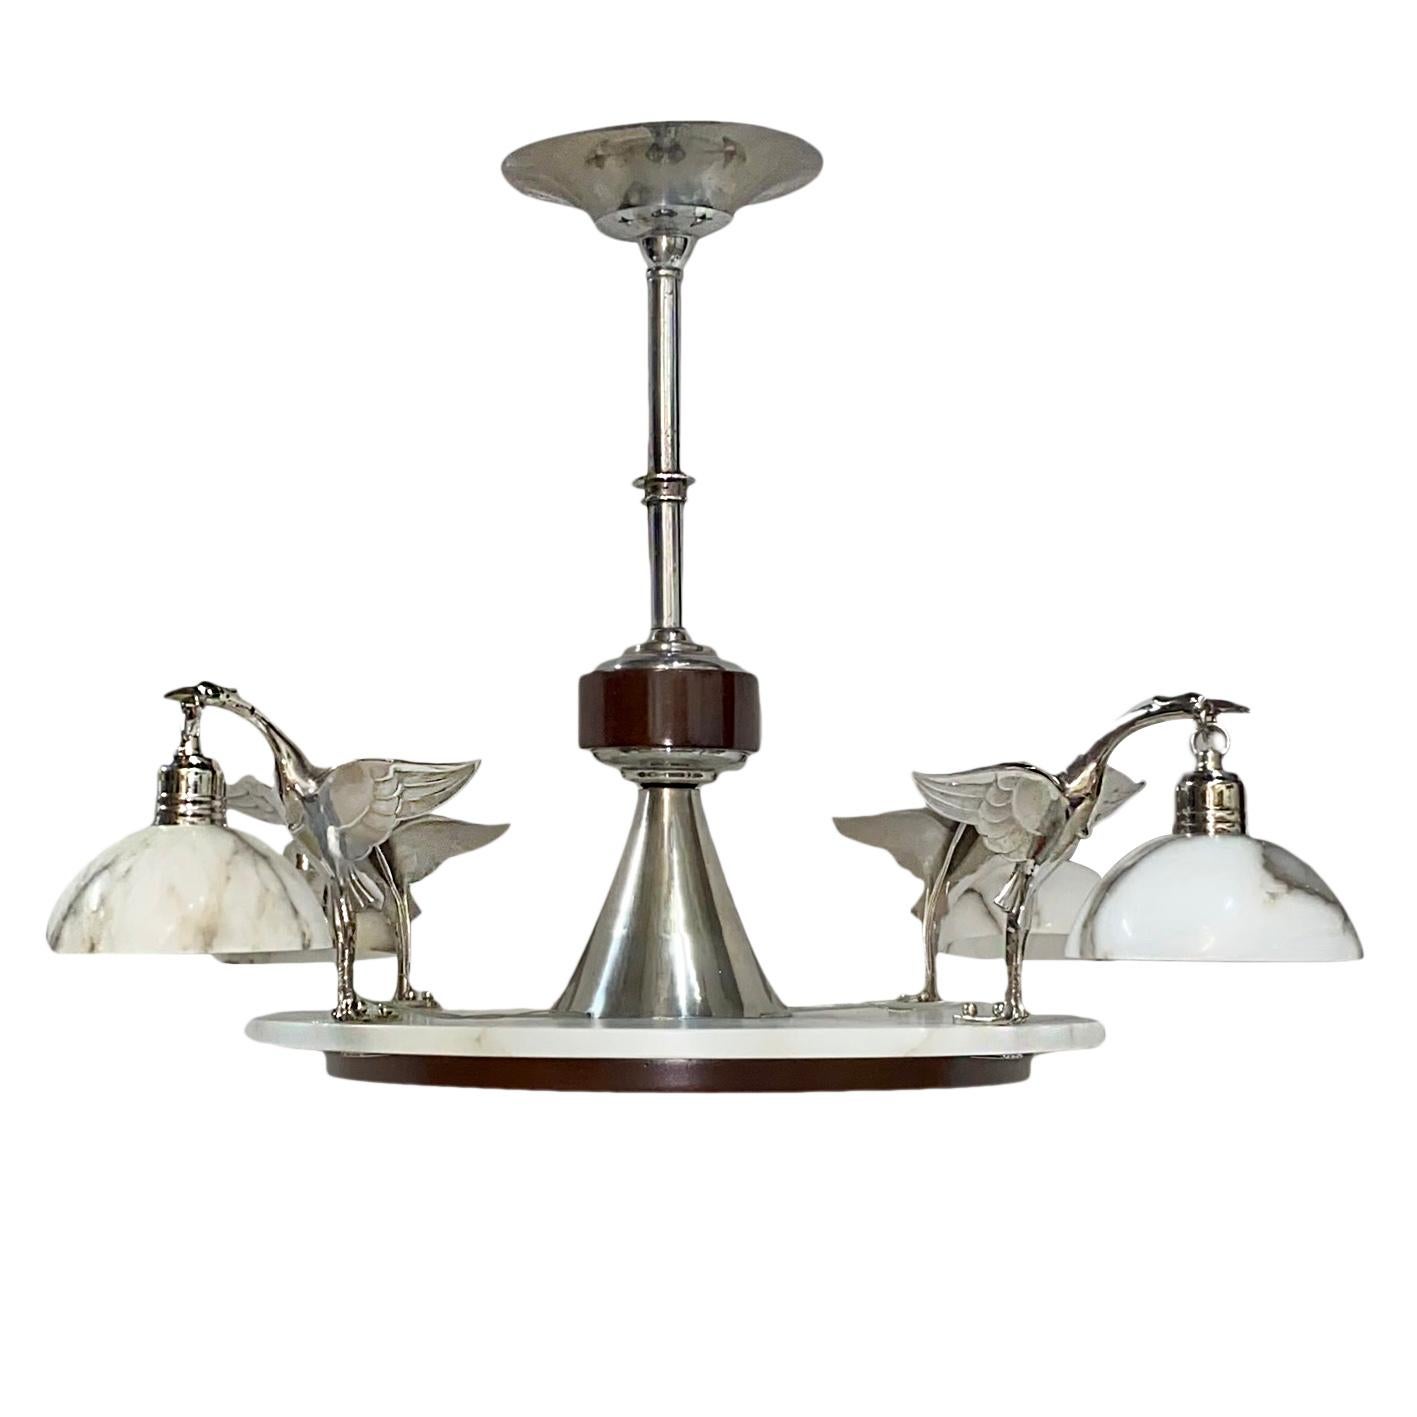 A circa 1940s French four-light chandelier with wood, alabaster and nickel-plated body.

Measurements:
Diameter 37